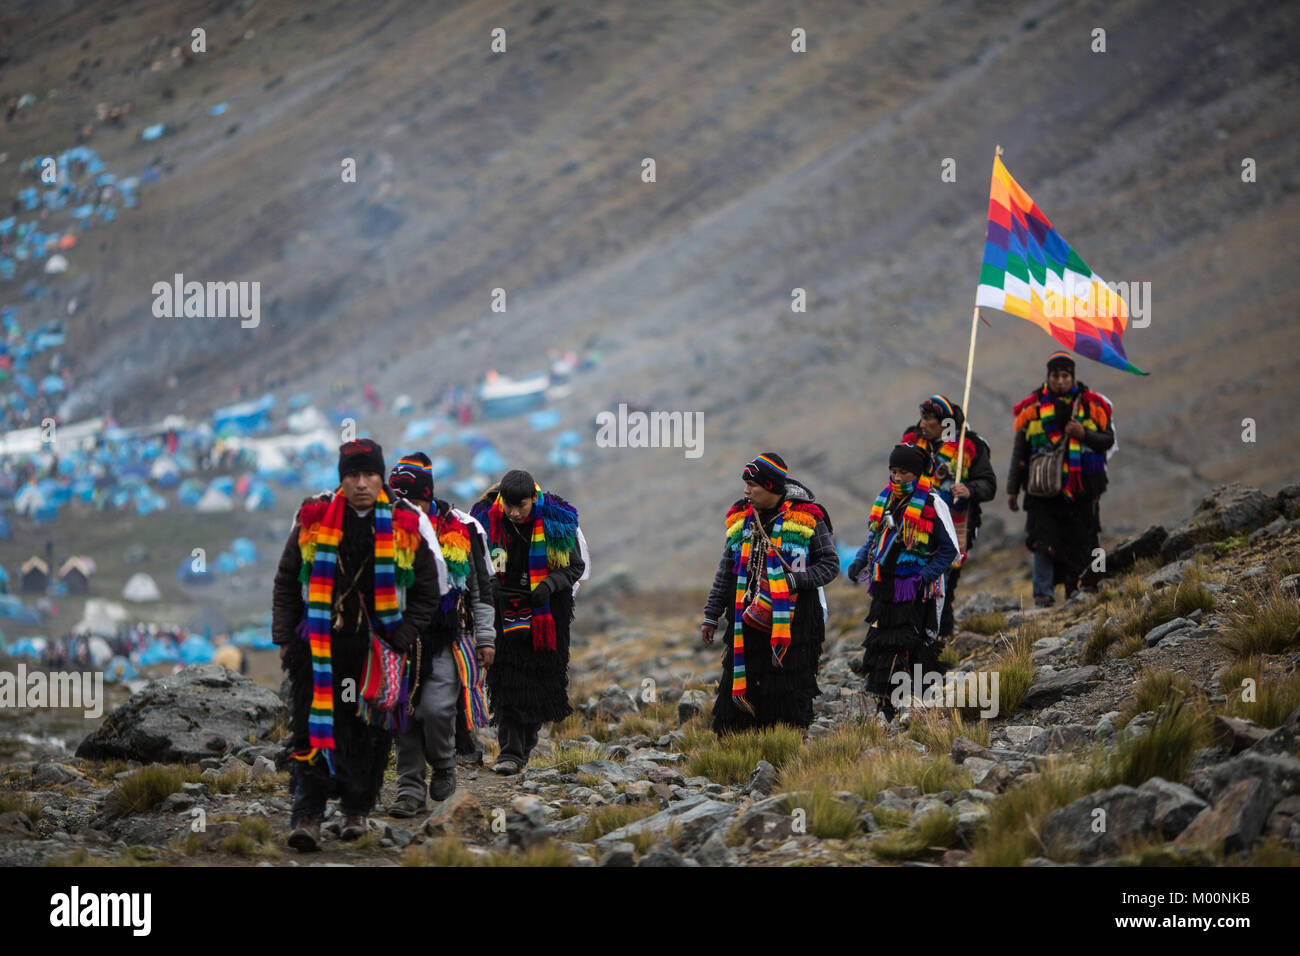 Cusco, Peru. 29th Dec, 2017. Members of the Urubamba nation ascend to Ausangate Mountain, at 6362m.The pilgrimage includes processions with crosses that climb to the snowy summit of the mountain and then descend the next day.Quyllur Rit'i or Star Snow Festival is a spiritual and religious festival held Annually at the Sinakara Valley in the Cusco Region of Peru. Groups of Quero indigenous people climb Ausangate Mountain, at 6362m, in search of the Snow Star Which is reputedly buried Within the mountain.According to the chroniclers, the Qoyllur Rit'i is the Christ that the Church sent p Stock Photo